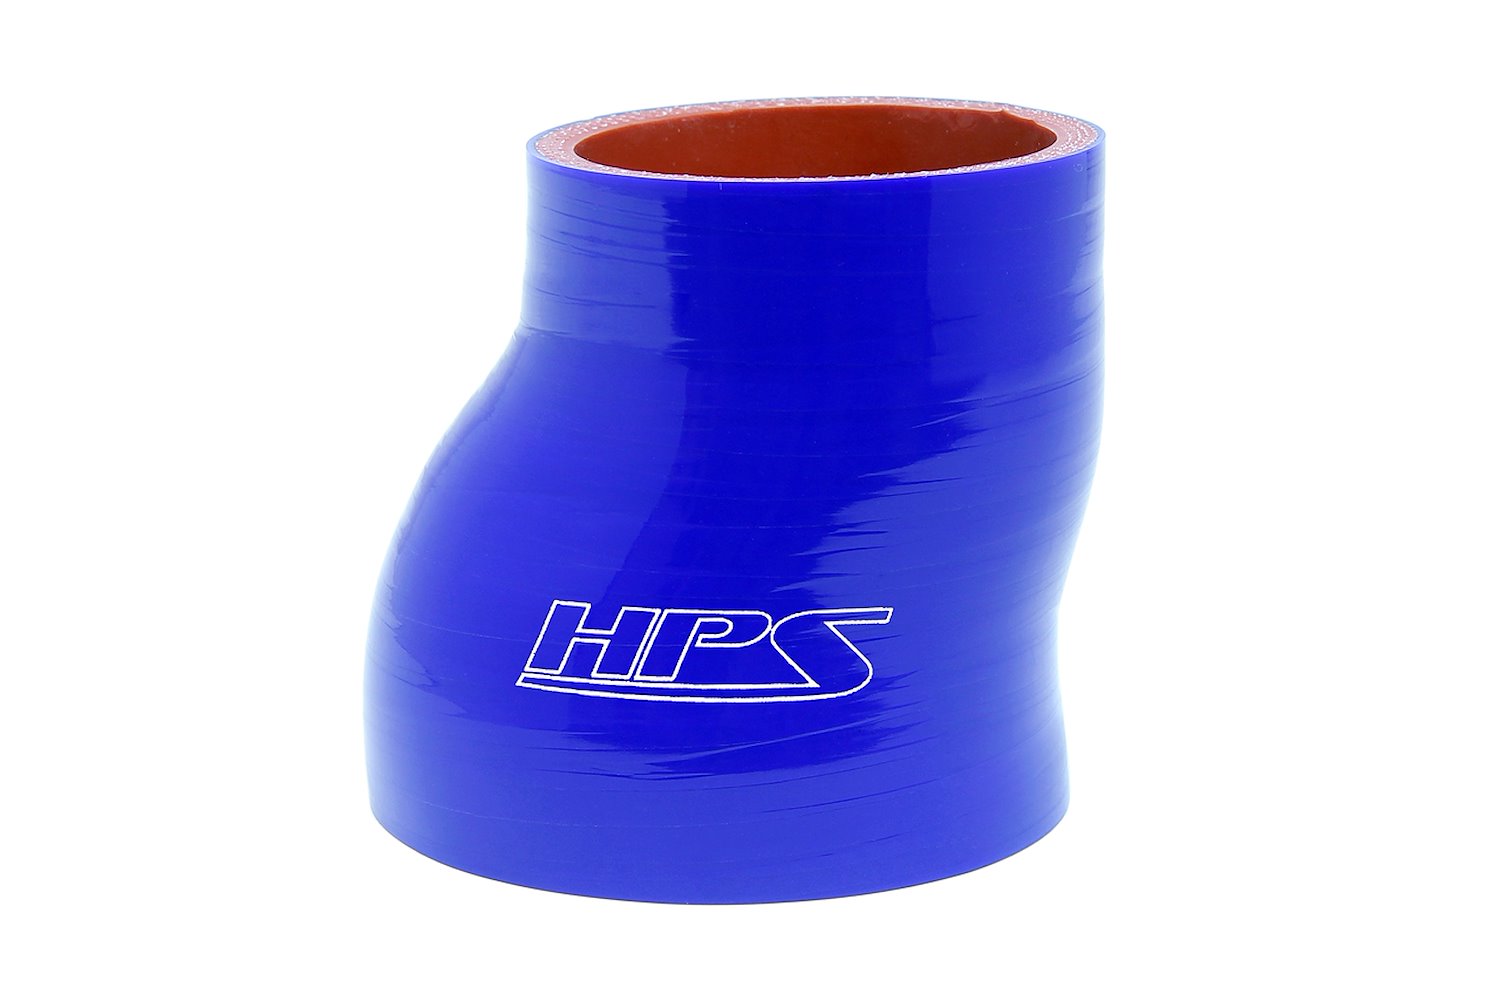 HTSOR-200-275-BLUE Silicone Offset Reducer Hose, High-Temp Reinforced, 2 in. - 2-3/4 in. ID, 3 in. Long, Blue